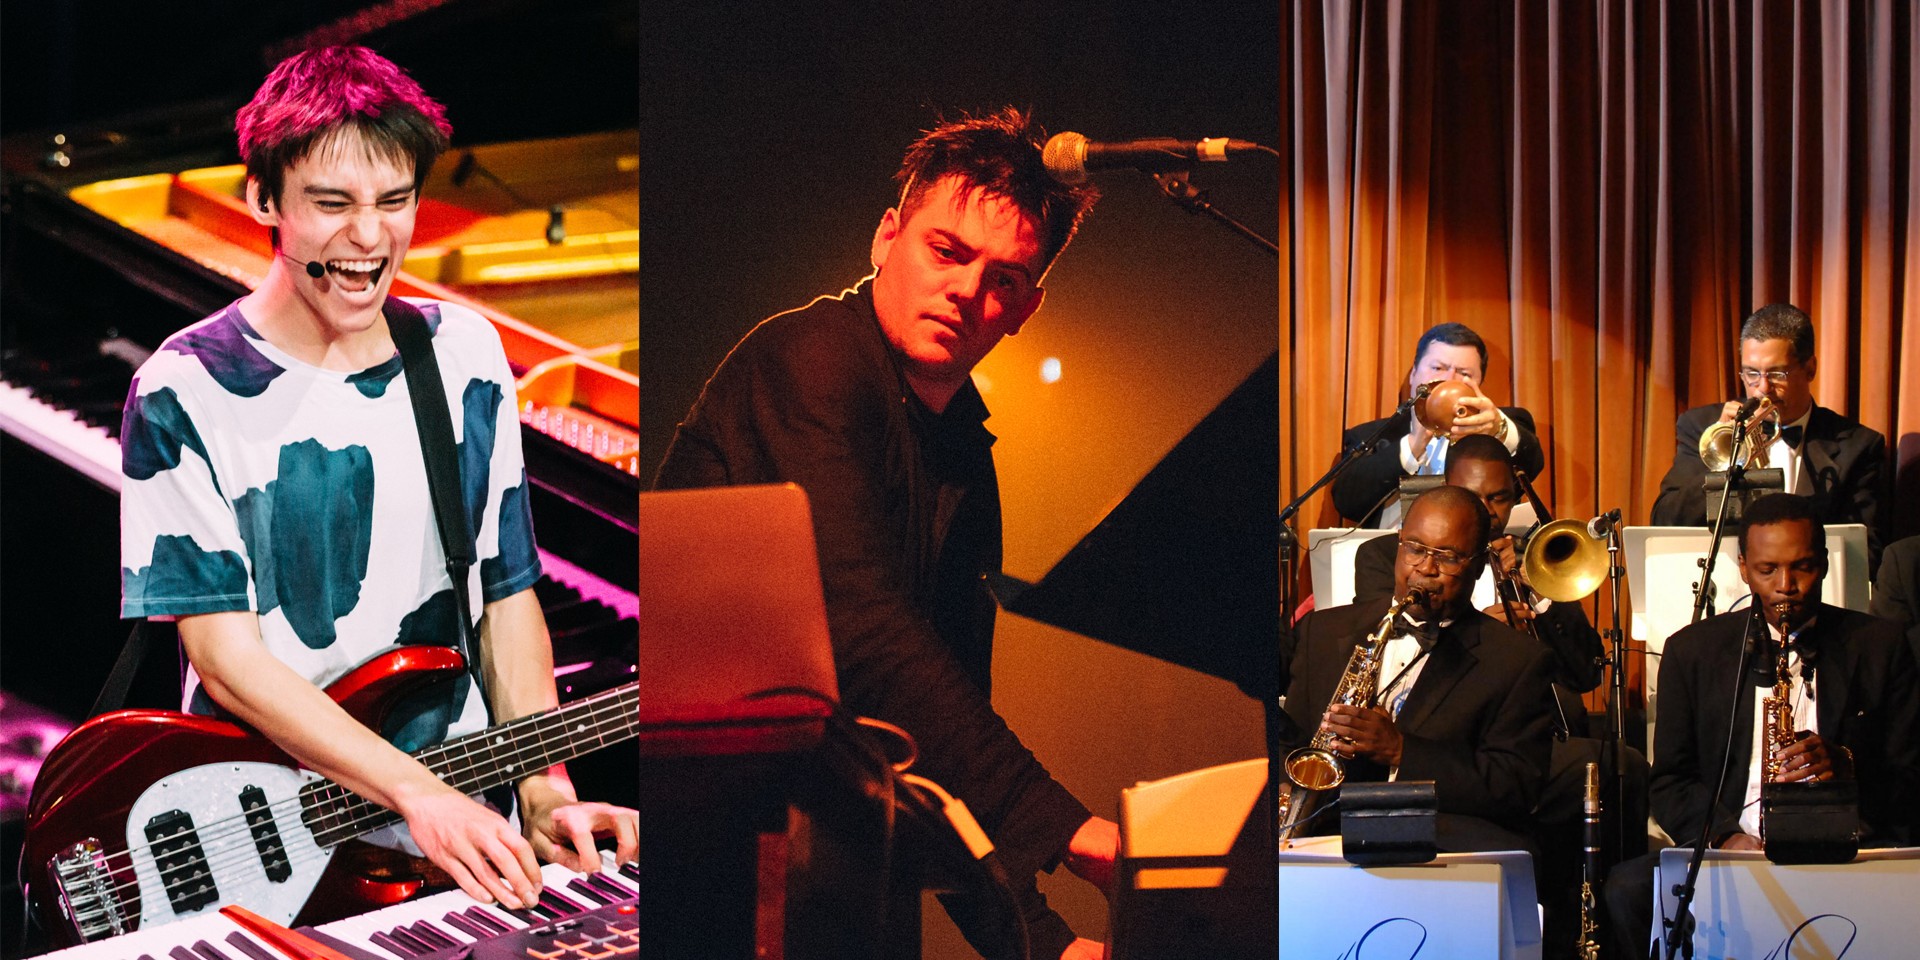 SIFA releases festival lineup: Jacob Collier, Nico Muhly, Duke Ellington Orchestra, Tcheka, Intriguant, SA, NADA and more